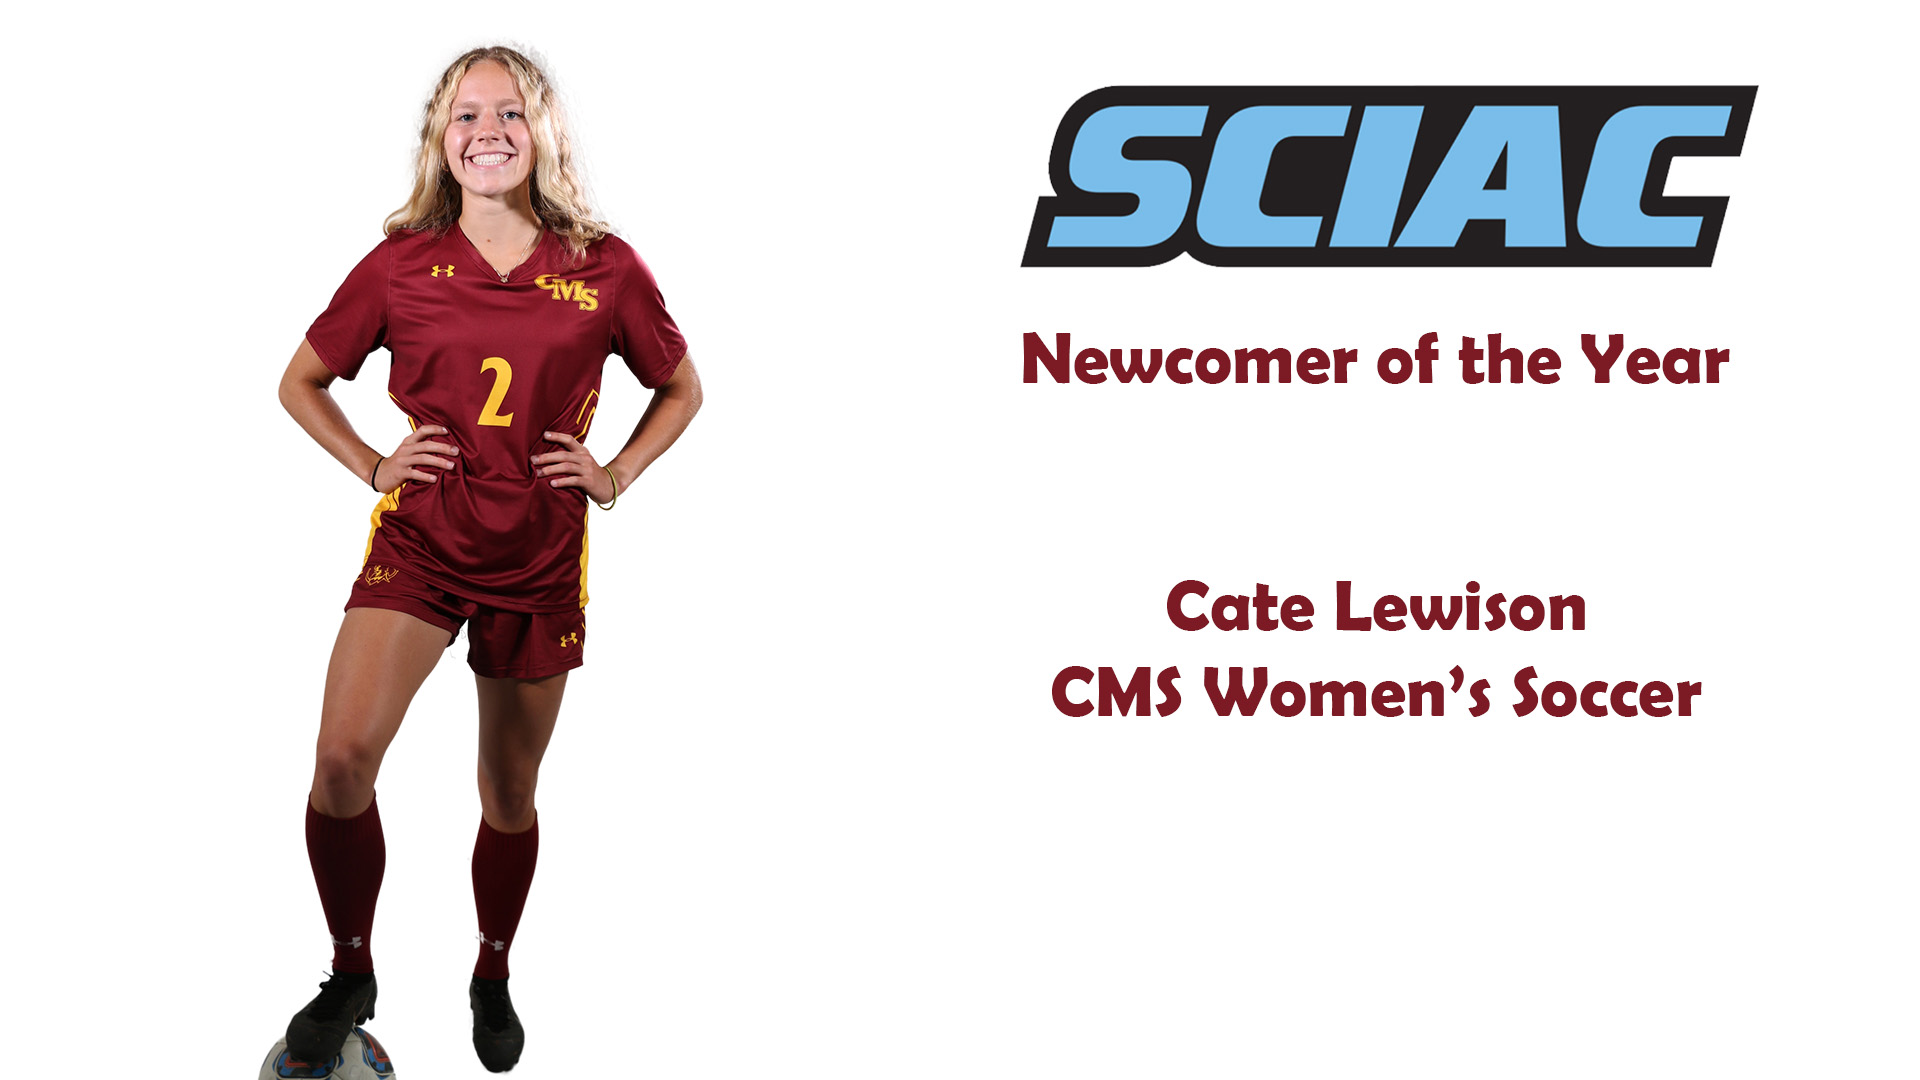 Posed shot of Cate Lewison with the SCIAC logo